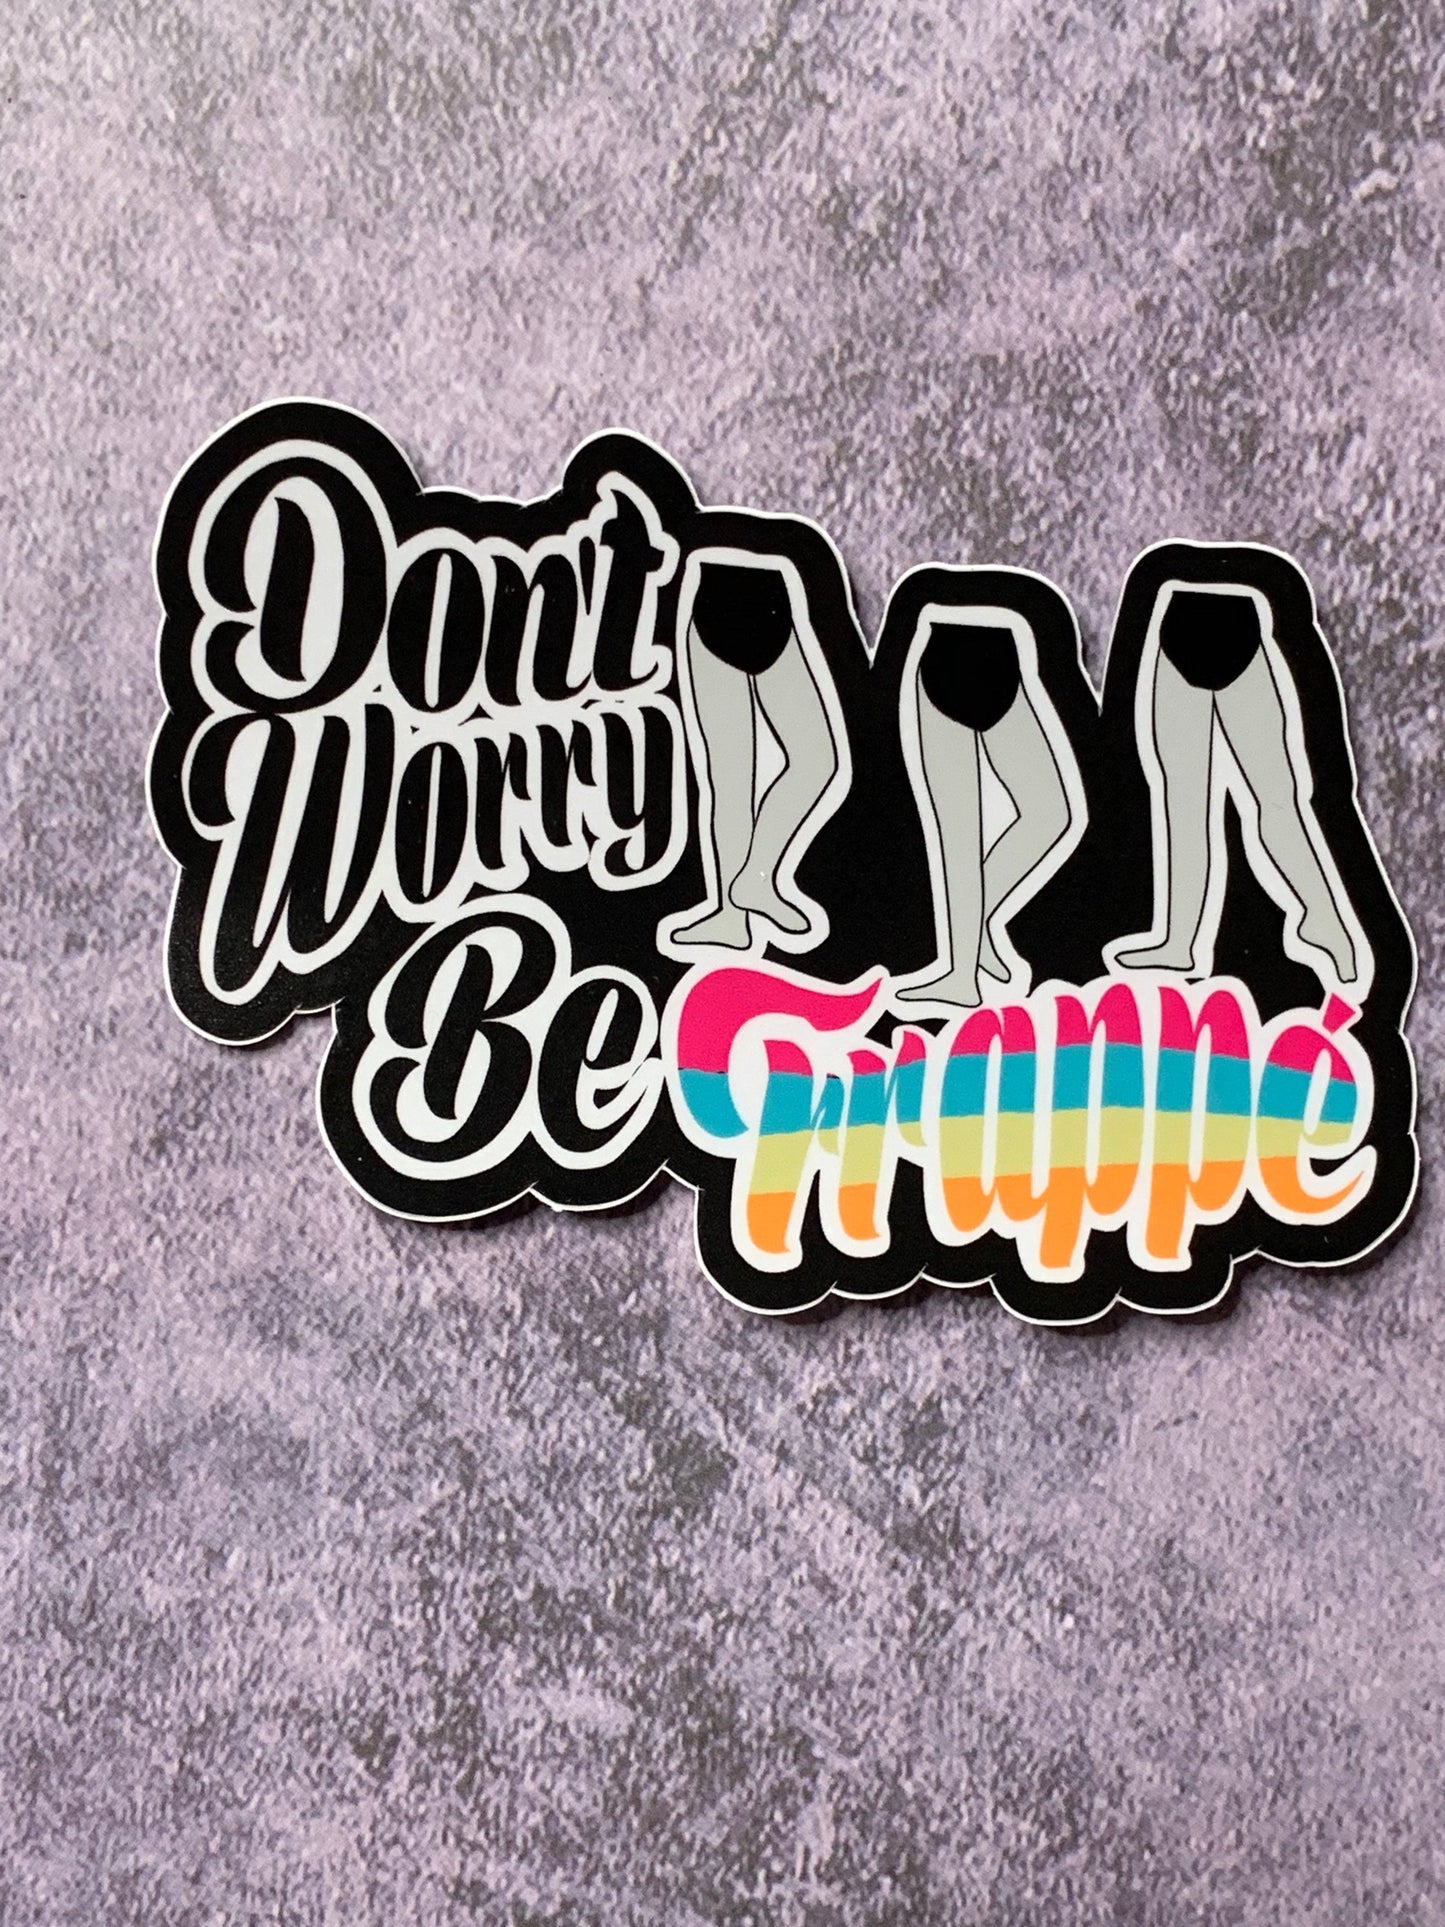 Don't Worry, Be Frappe Vinyl Sticker, Vinyl Decal, Laptop Sticker, Gifts for Her, Dance Sticker